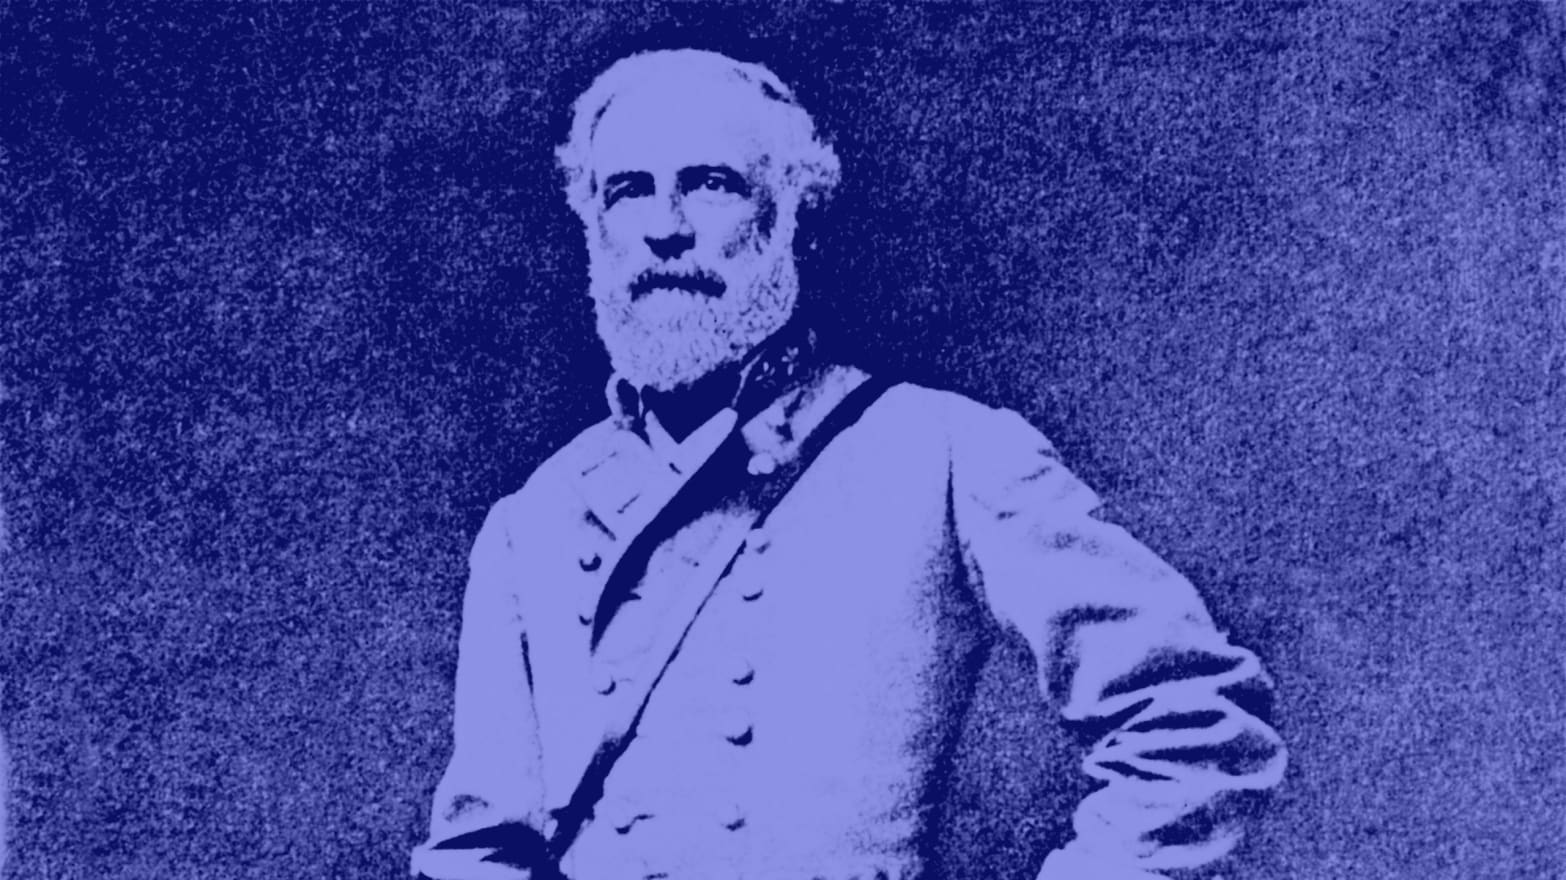 How I Learned to Hate Robert E. Lee